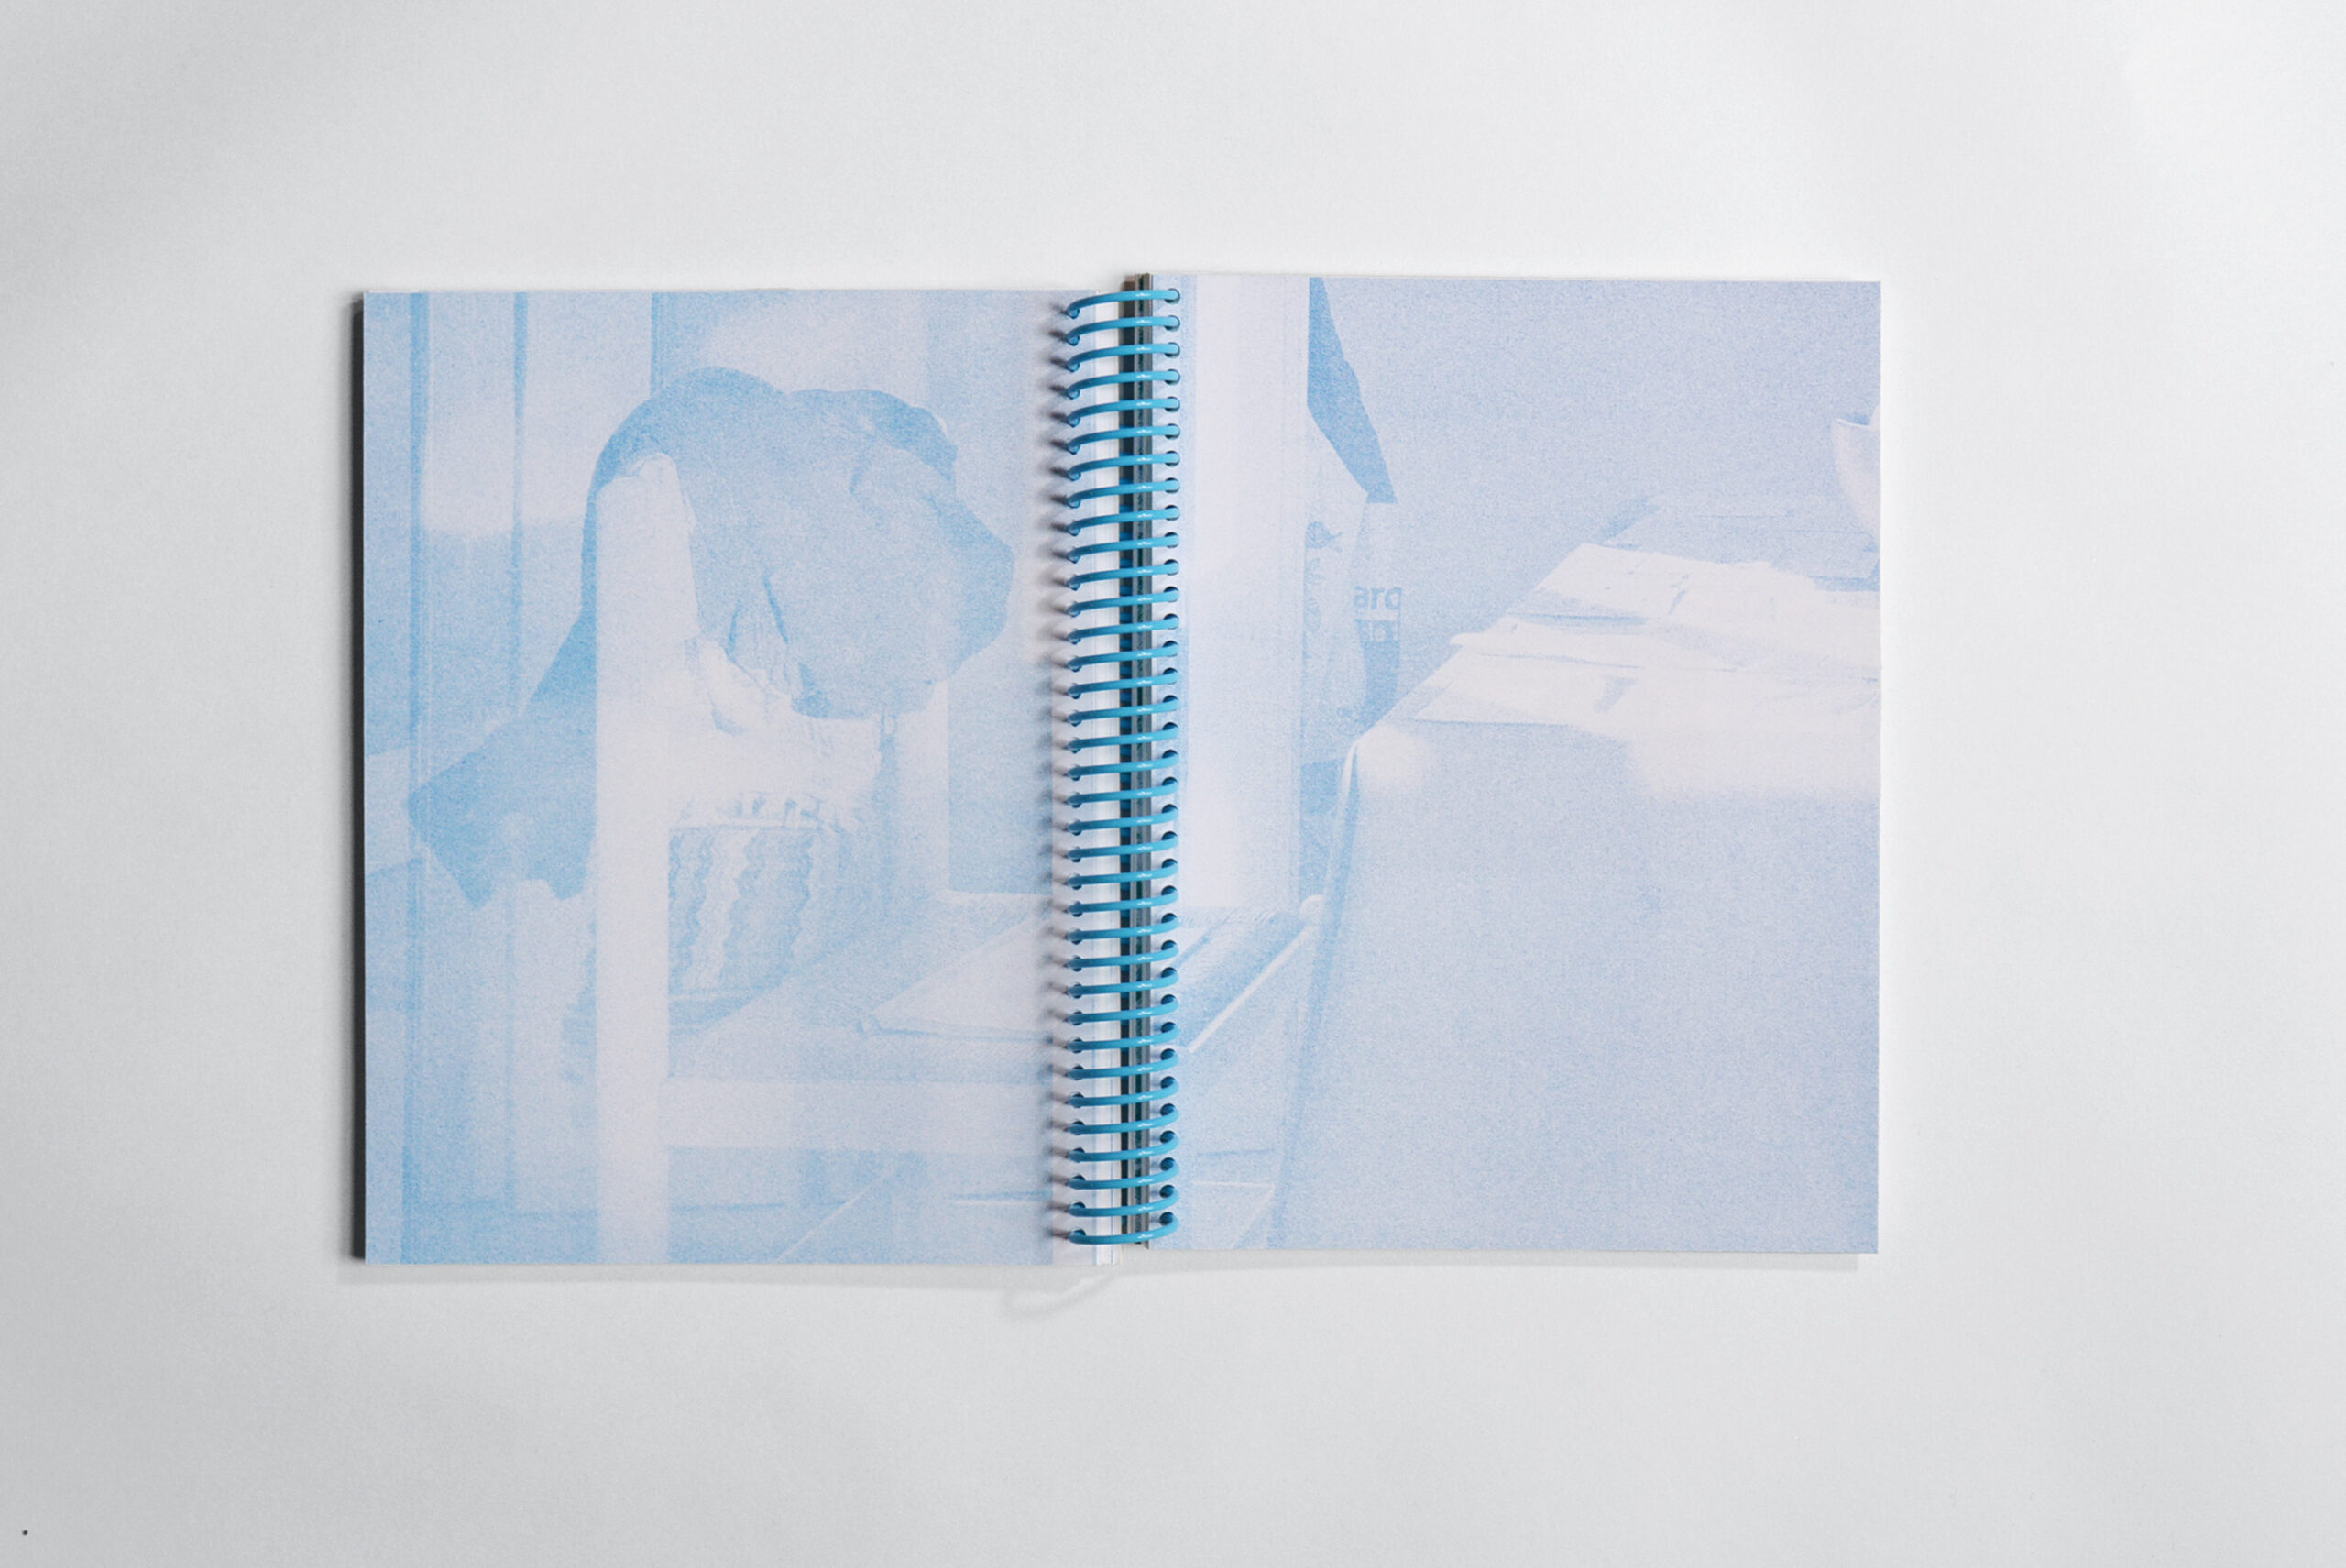 Risograph printed exhibition catalog with light blue image on white paper, bound with a blue spiral coil.